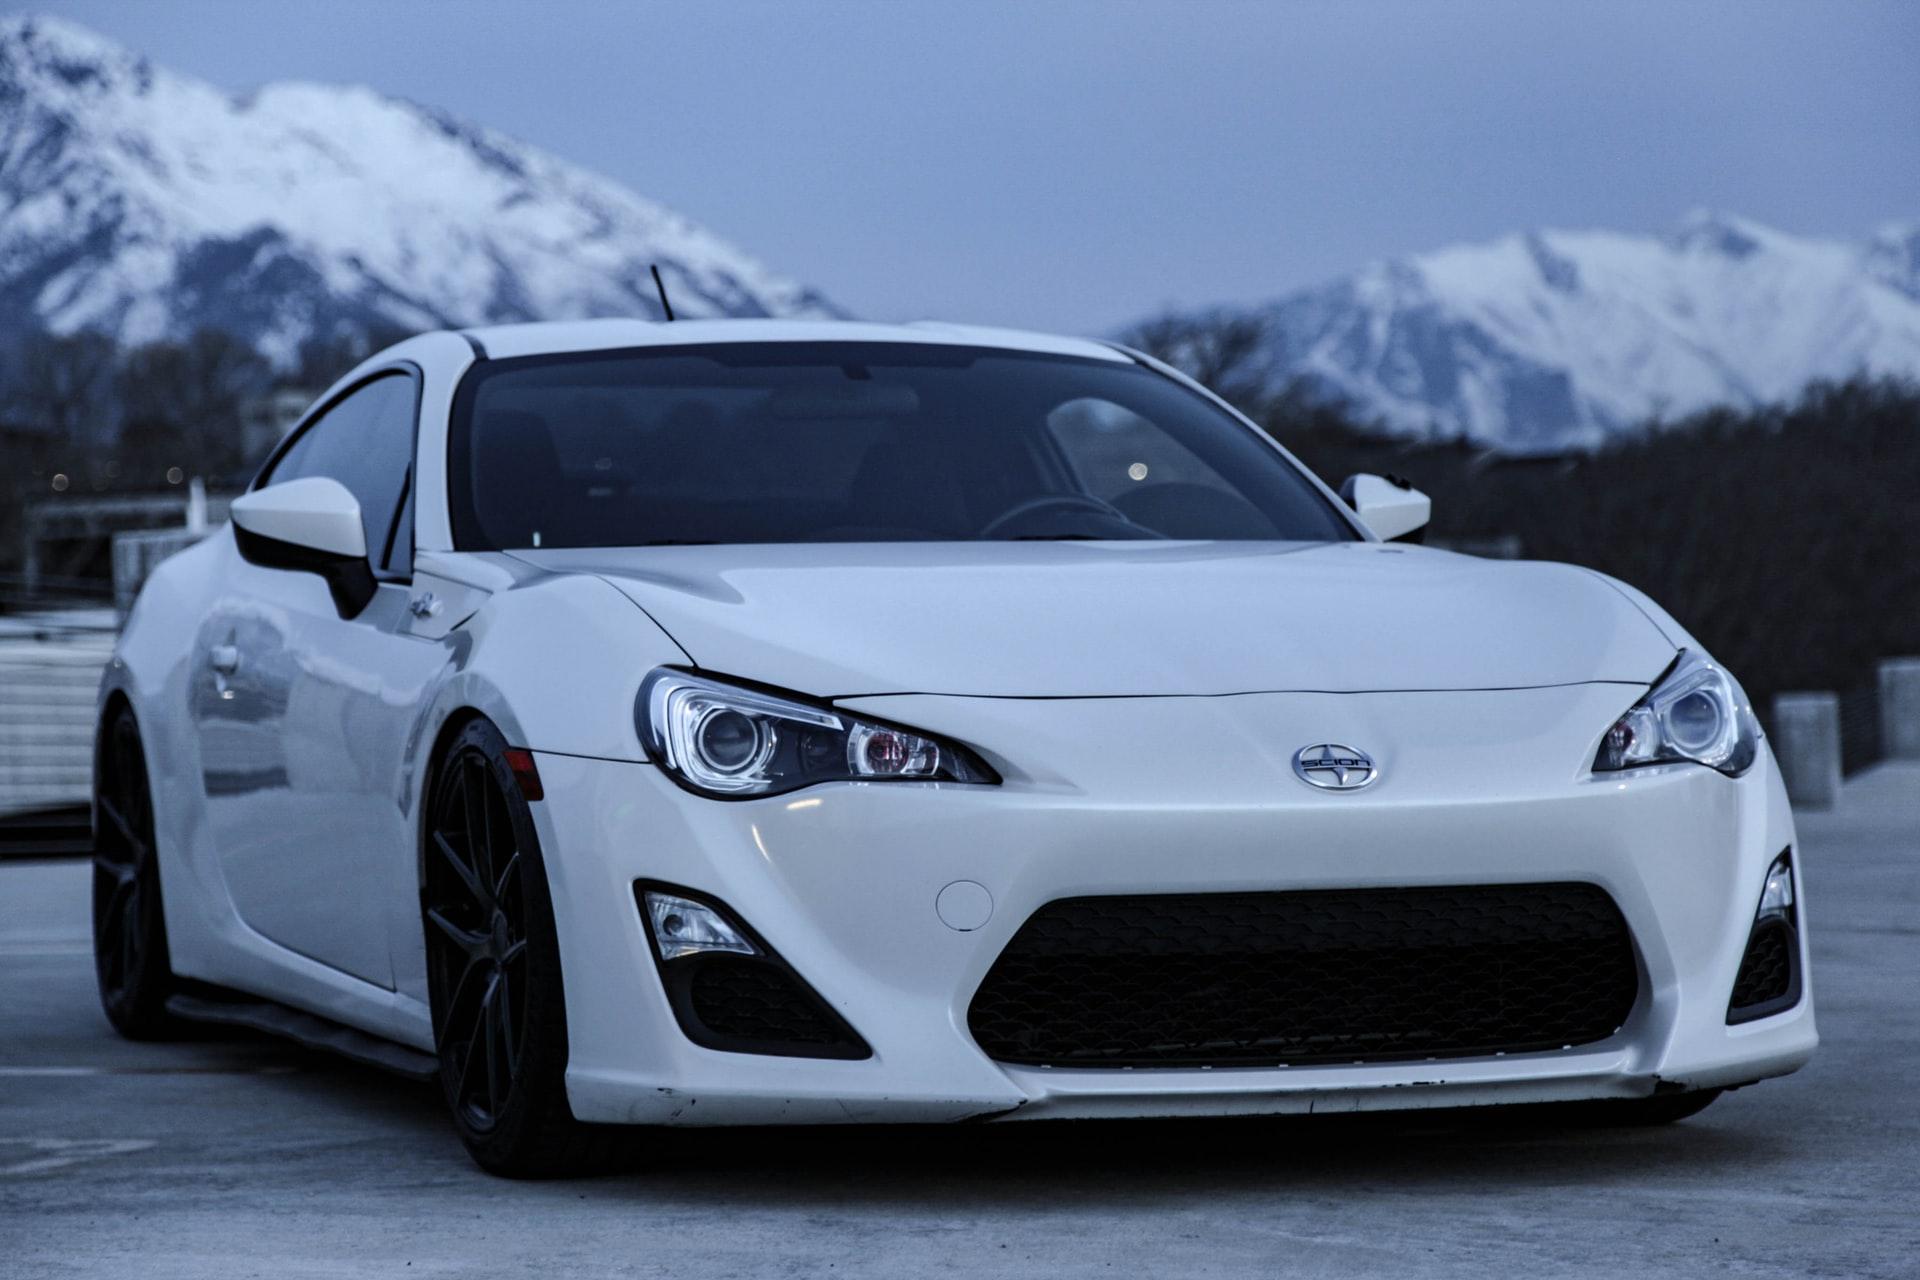 Toyota wanted Scion to cater to young Millennial drivers.